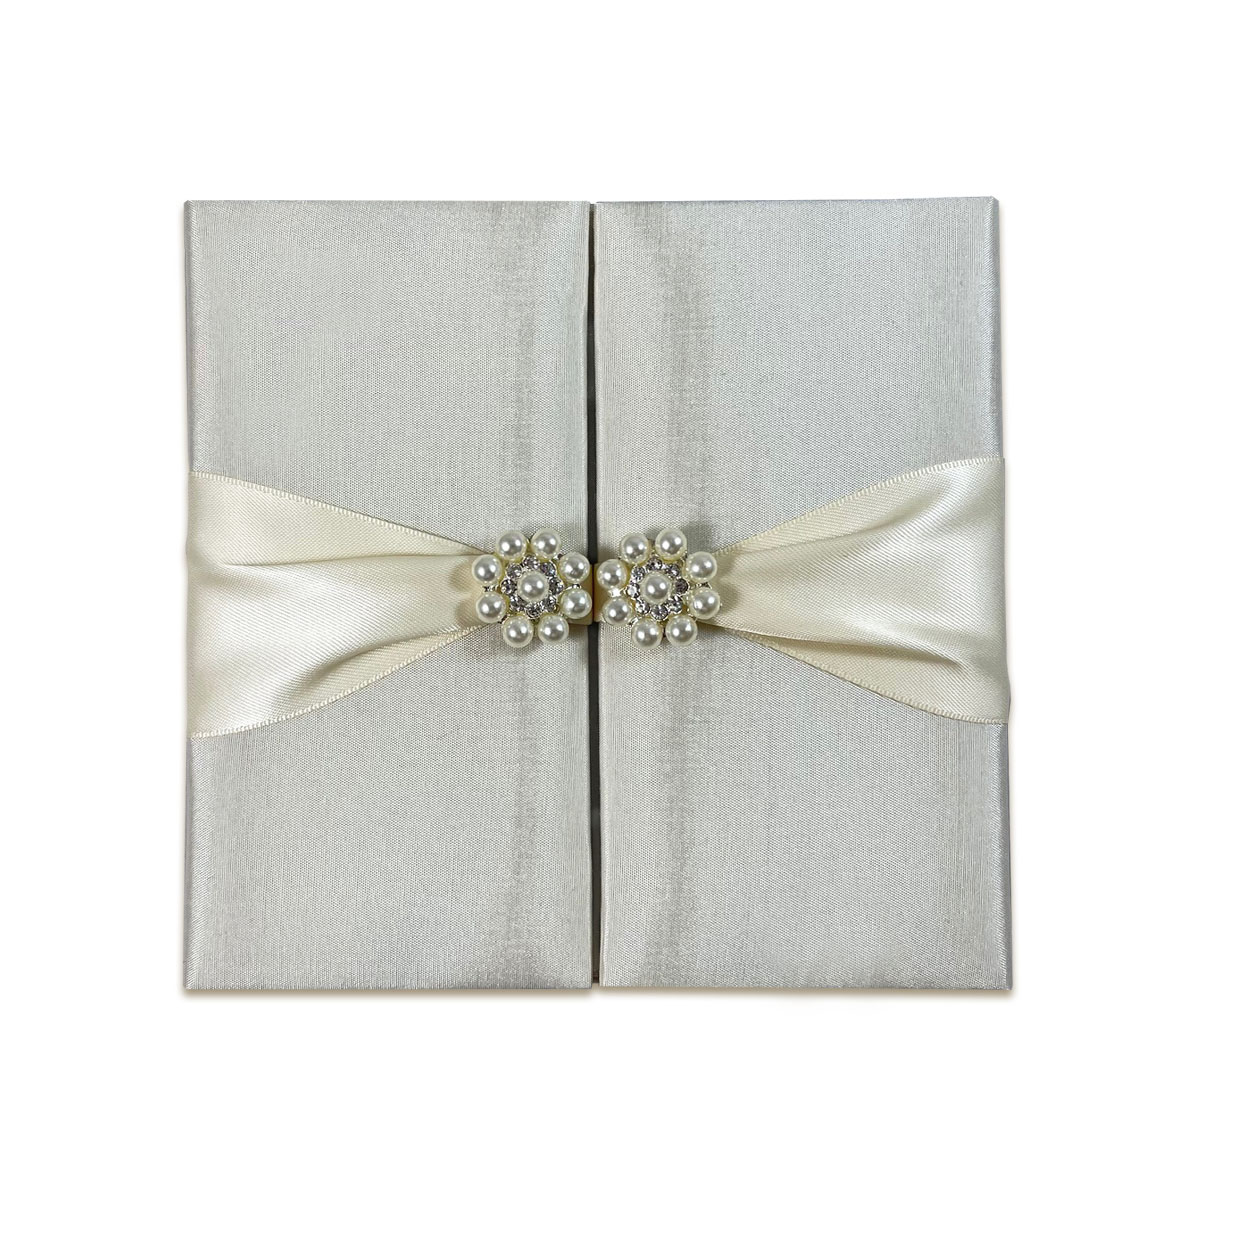 Golden Wedding Favour Box With Cream Ribbon Featuring Pearl Brooch